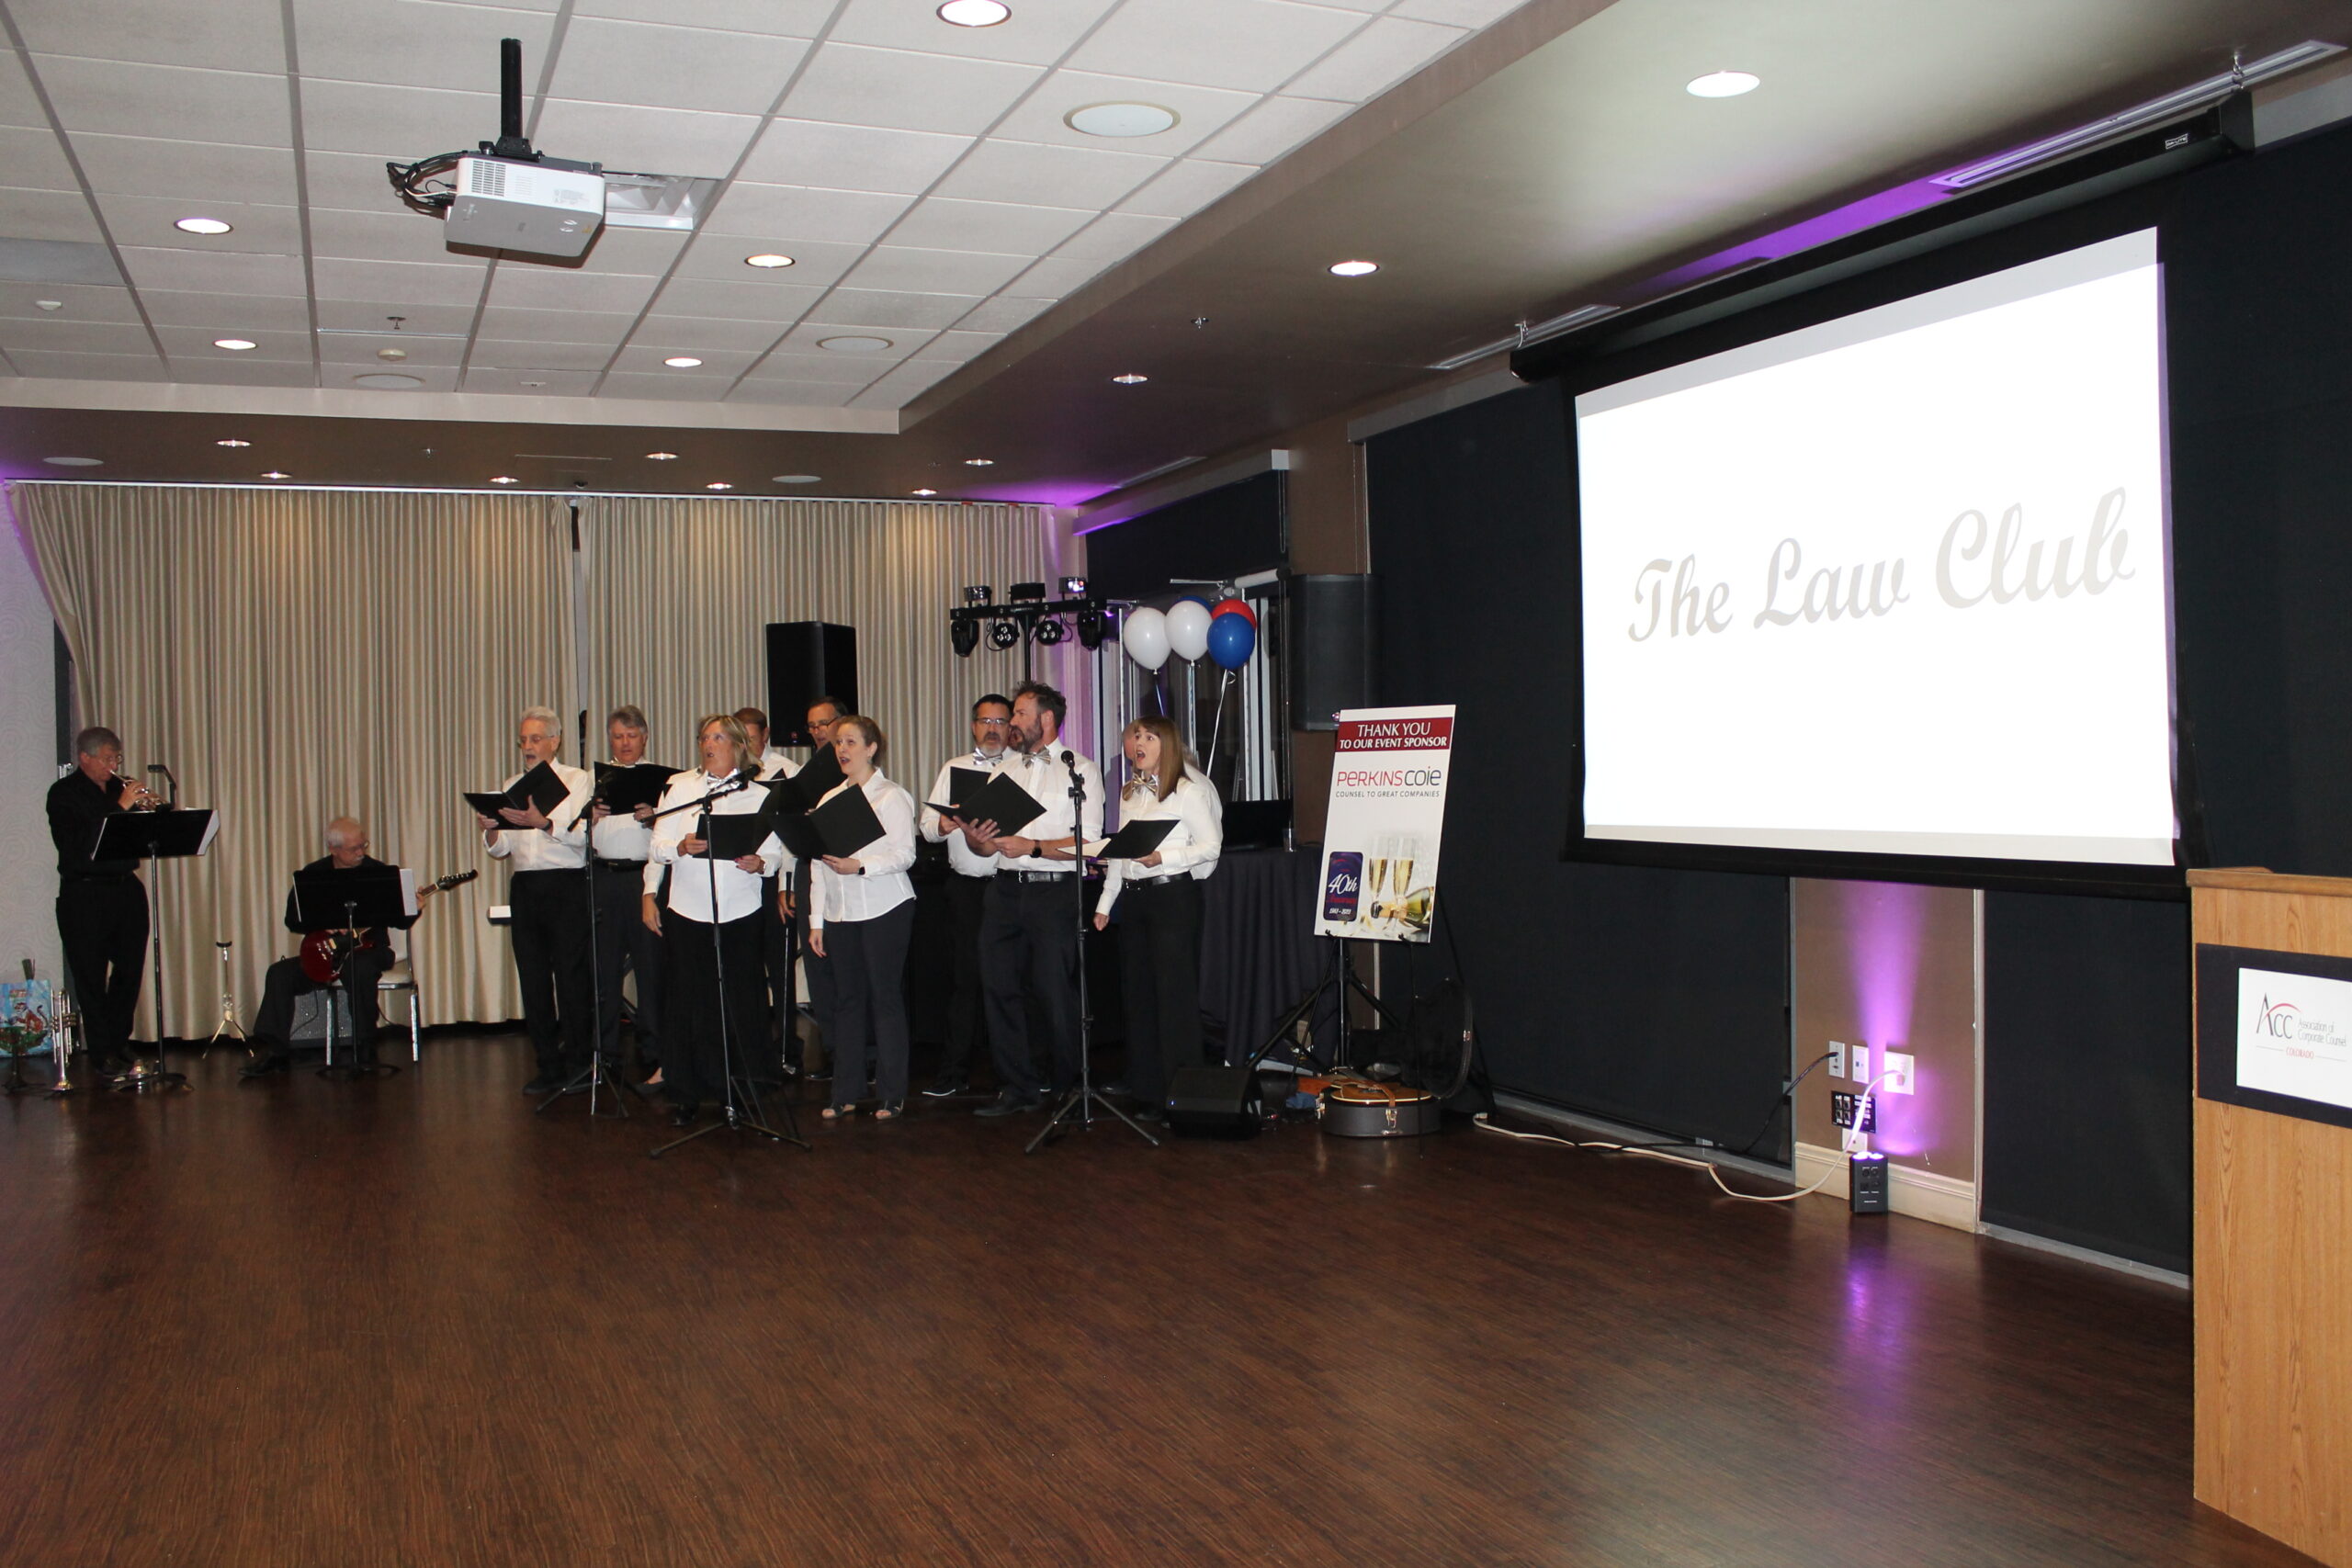 The Law Club musical group is performing next to a screen that says "The Law Club."